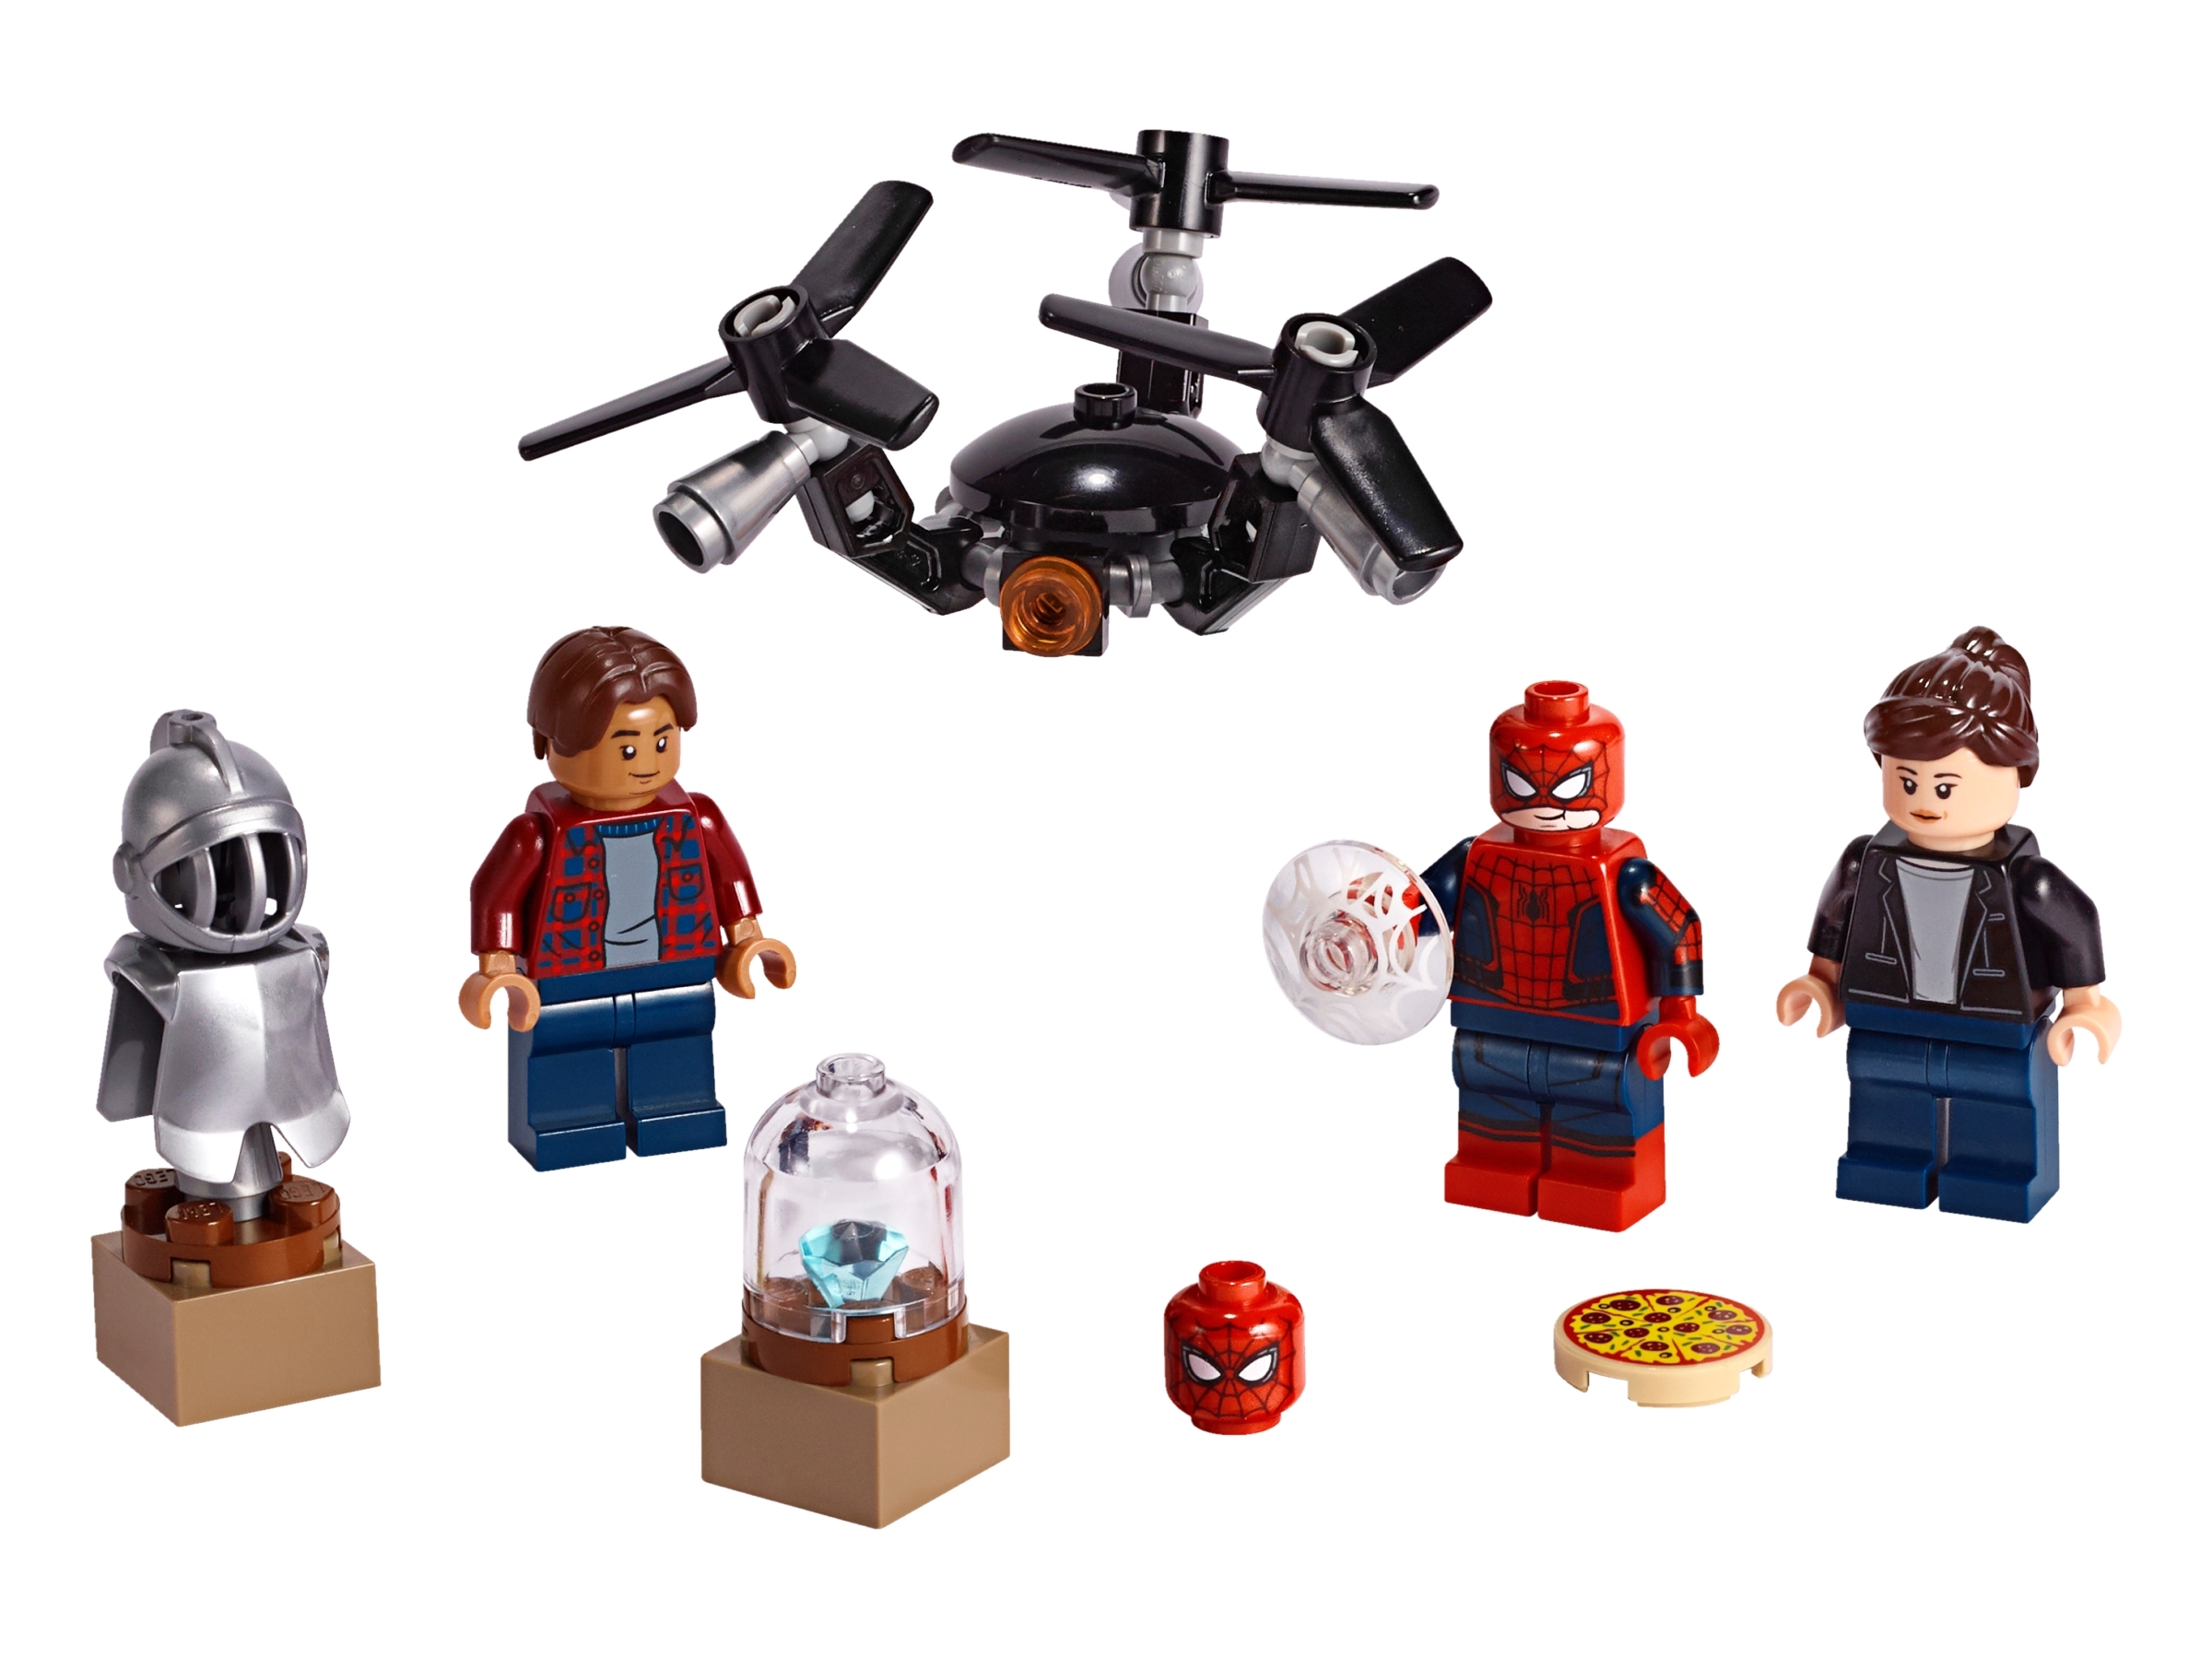 lego spider man far for home